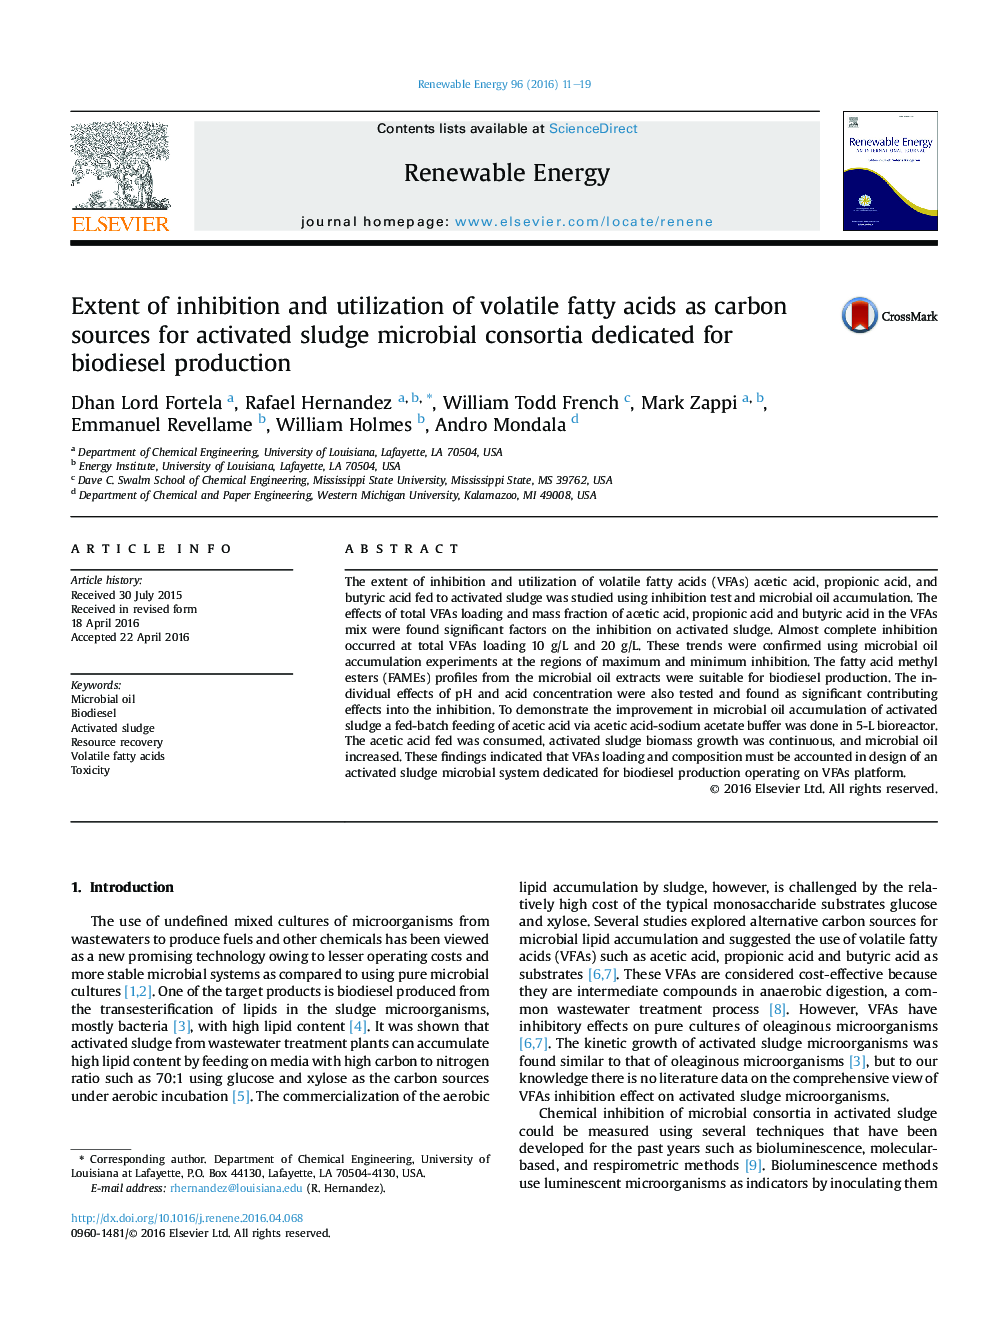 Extent of inhibition and utilization of volatile fatty acids as carbon sources for activated sludge microbial consortia dedicated for biodiesel production